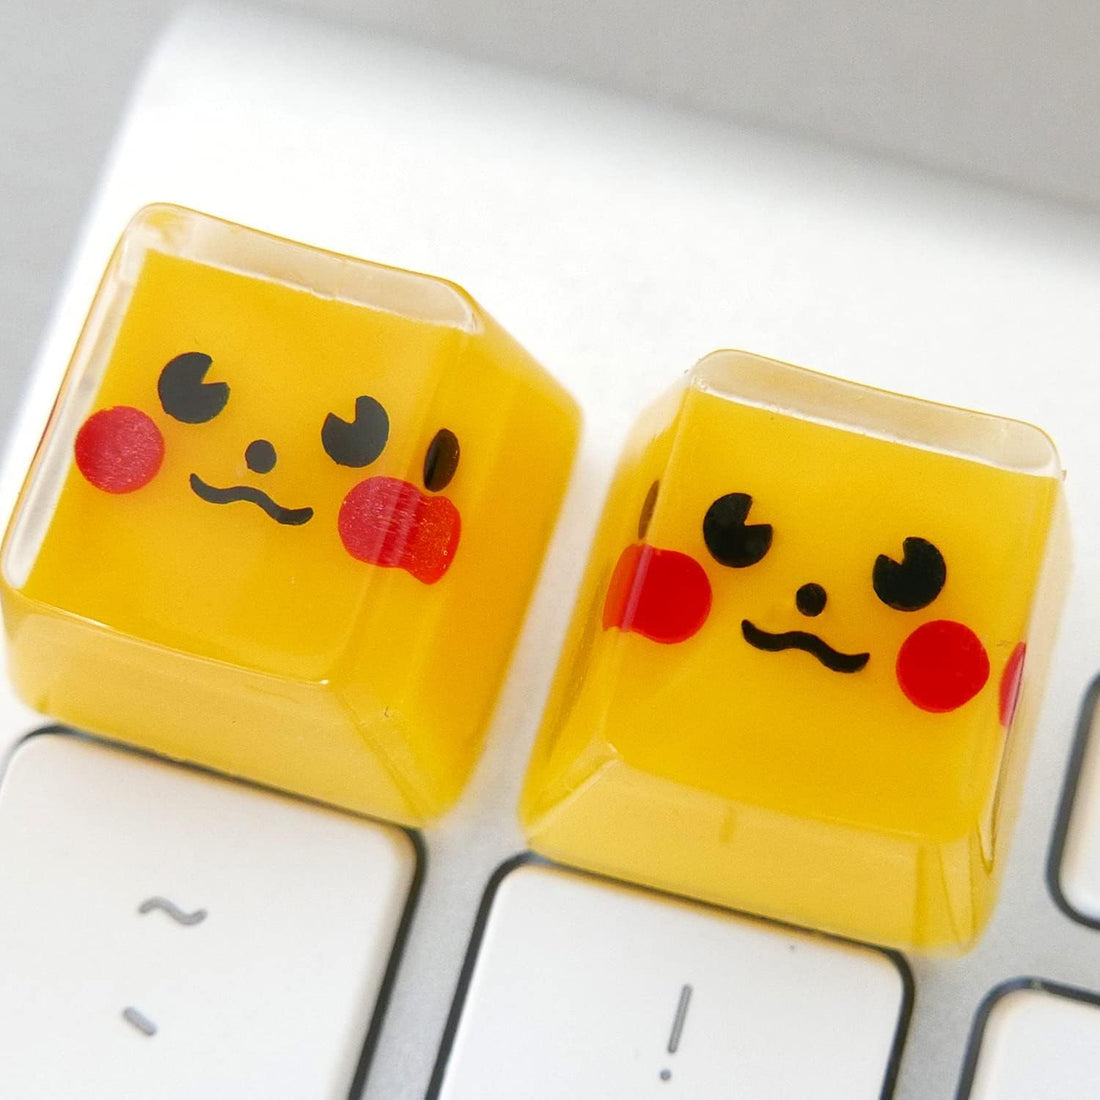 Gaming Keycaps Resin Keycaps for Cherry MX Swtiches Handmade (Style1)